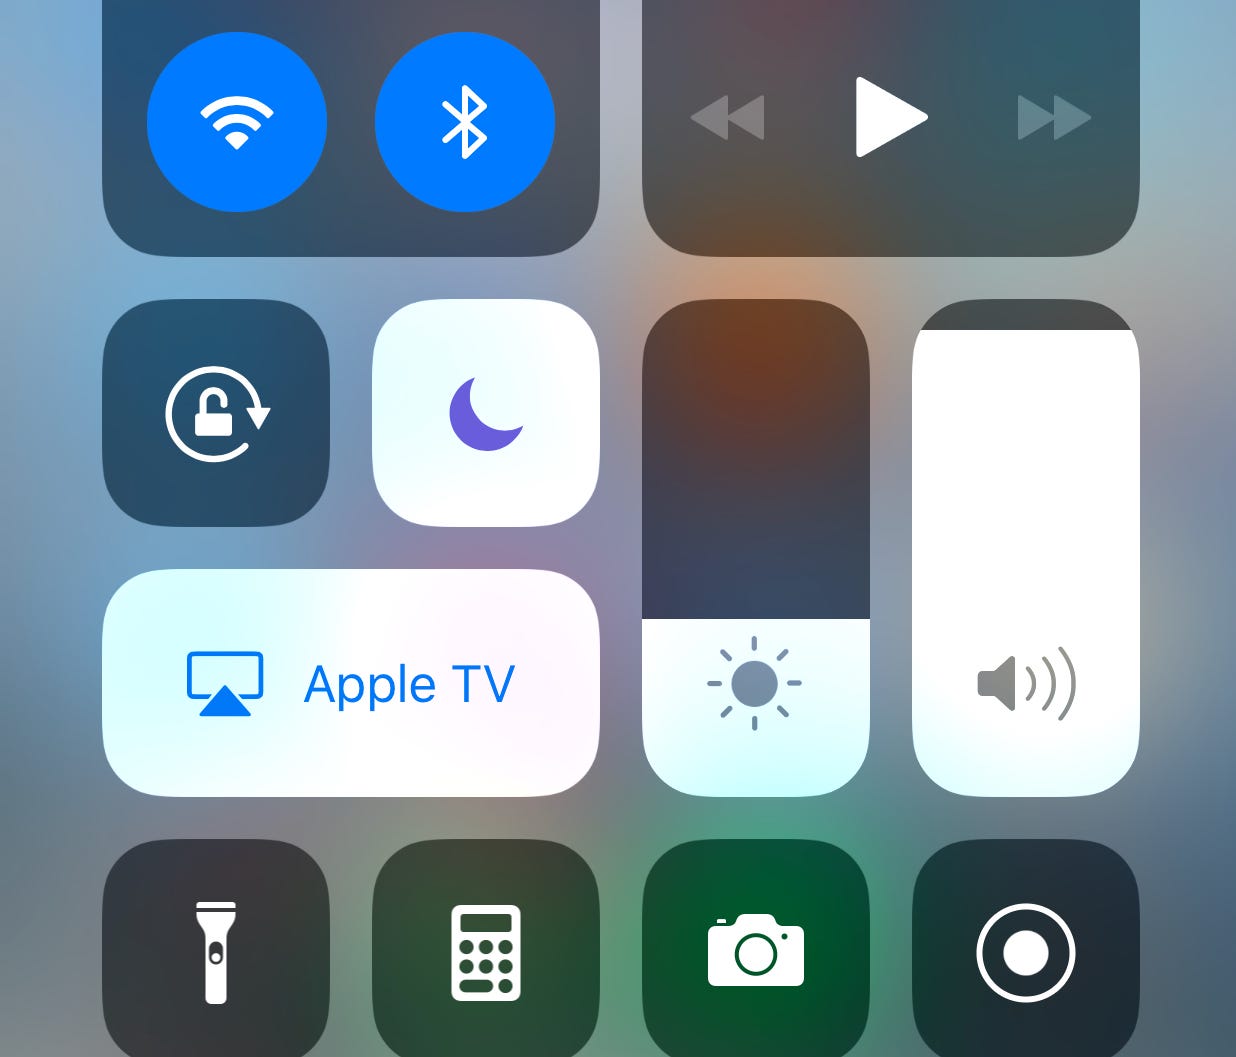 Apple's new Control Center lets you mix and match your favorite shortcuts in iOS11